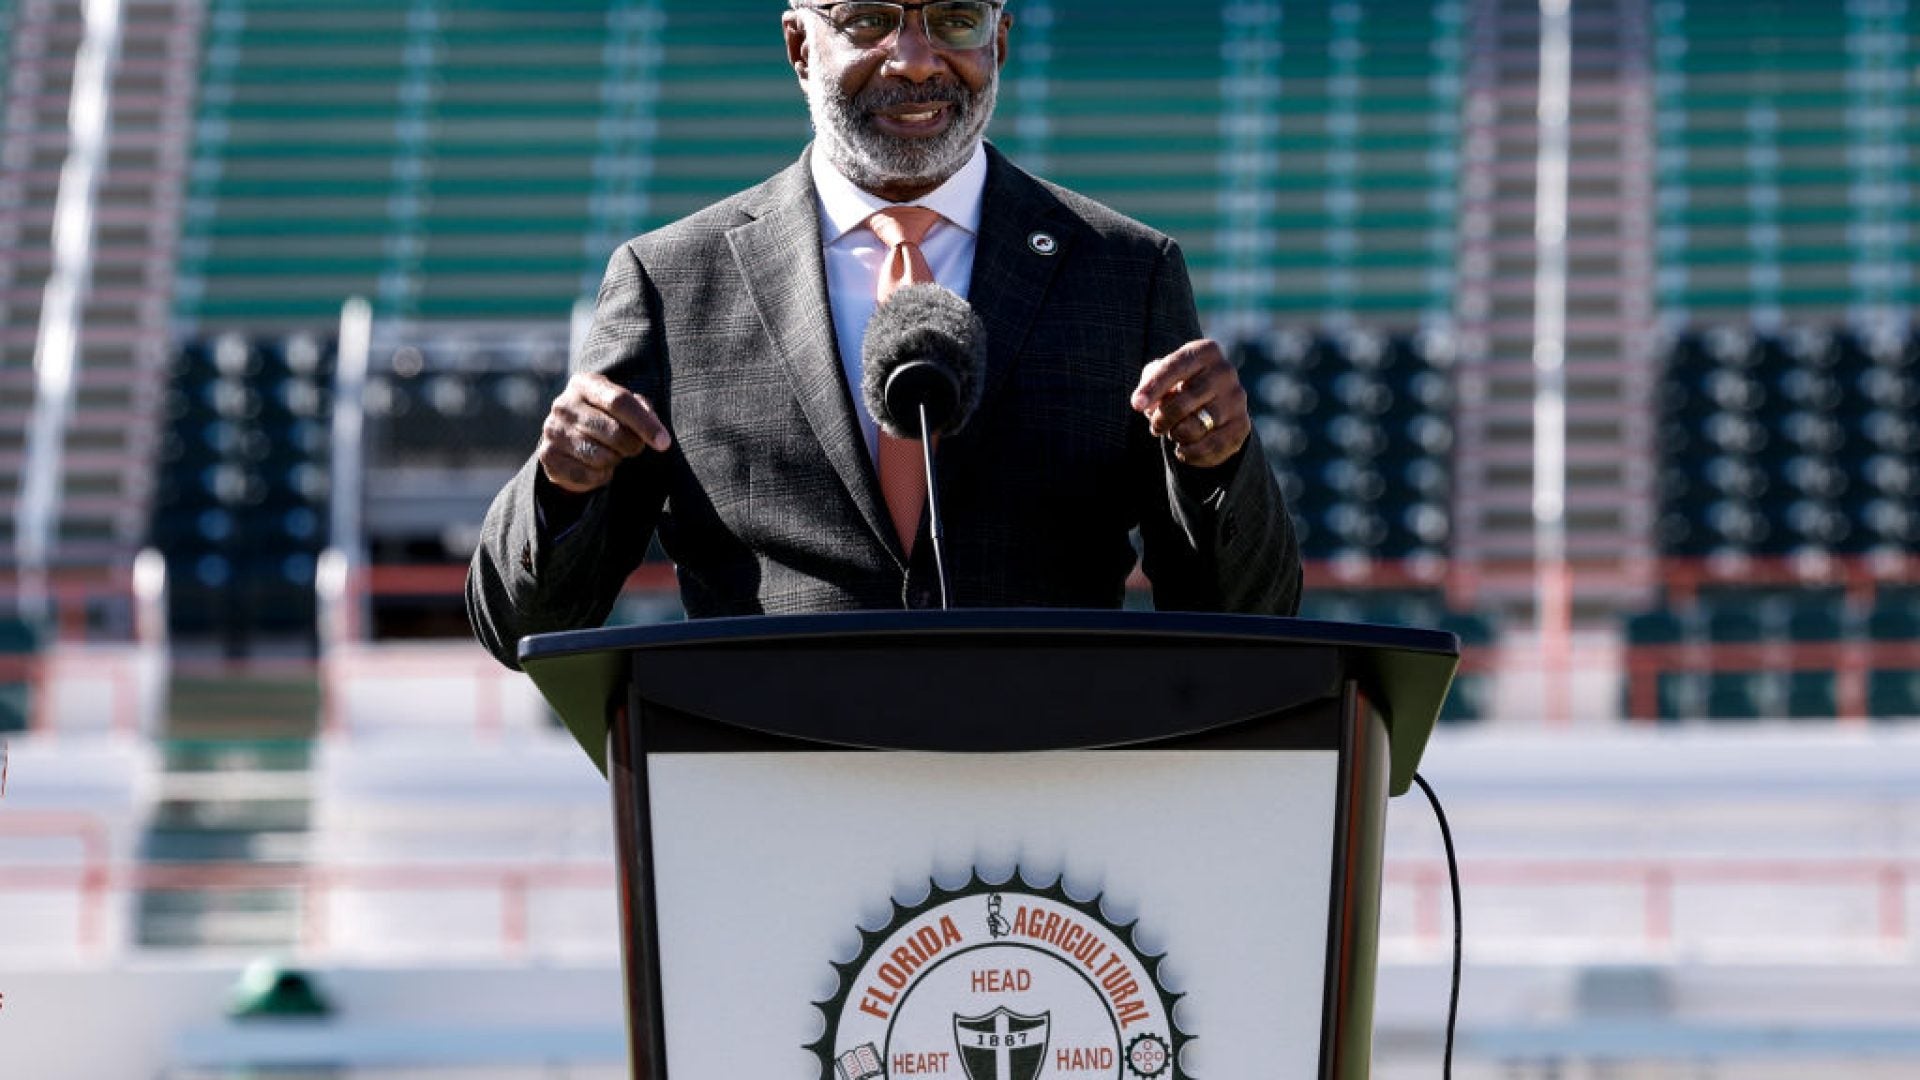 FAMU Launches Investigation After It's Discovered That $237 Million Donation Is Likely A Sham